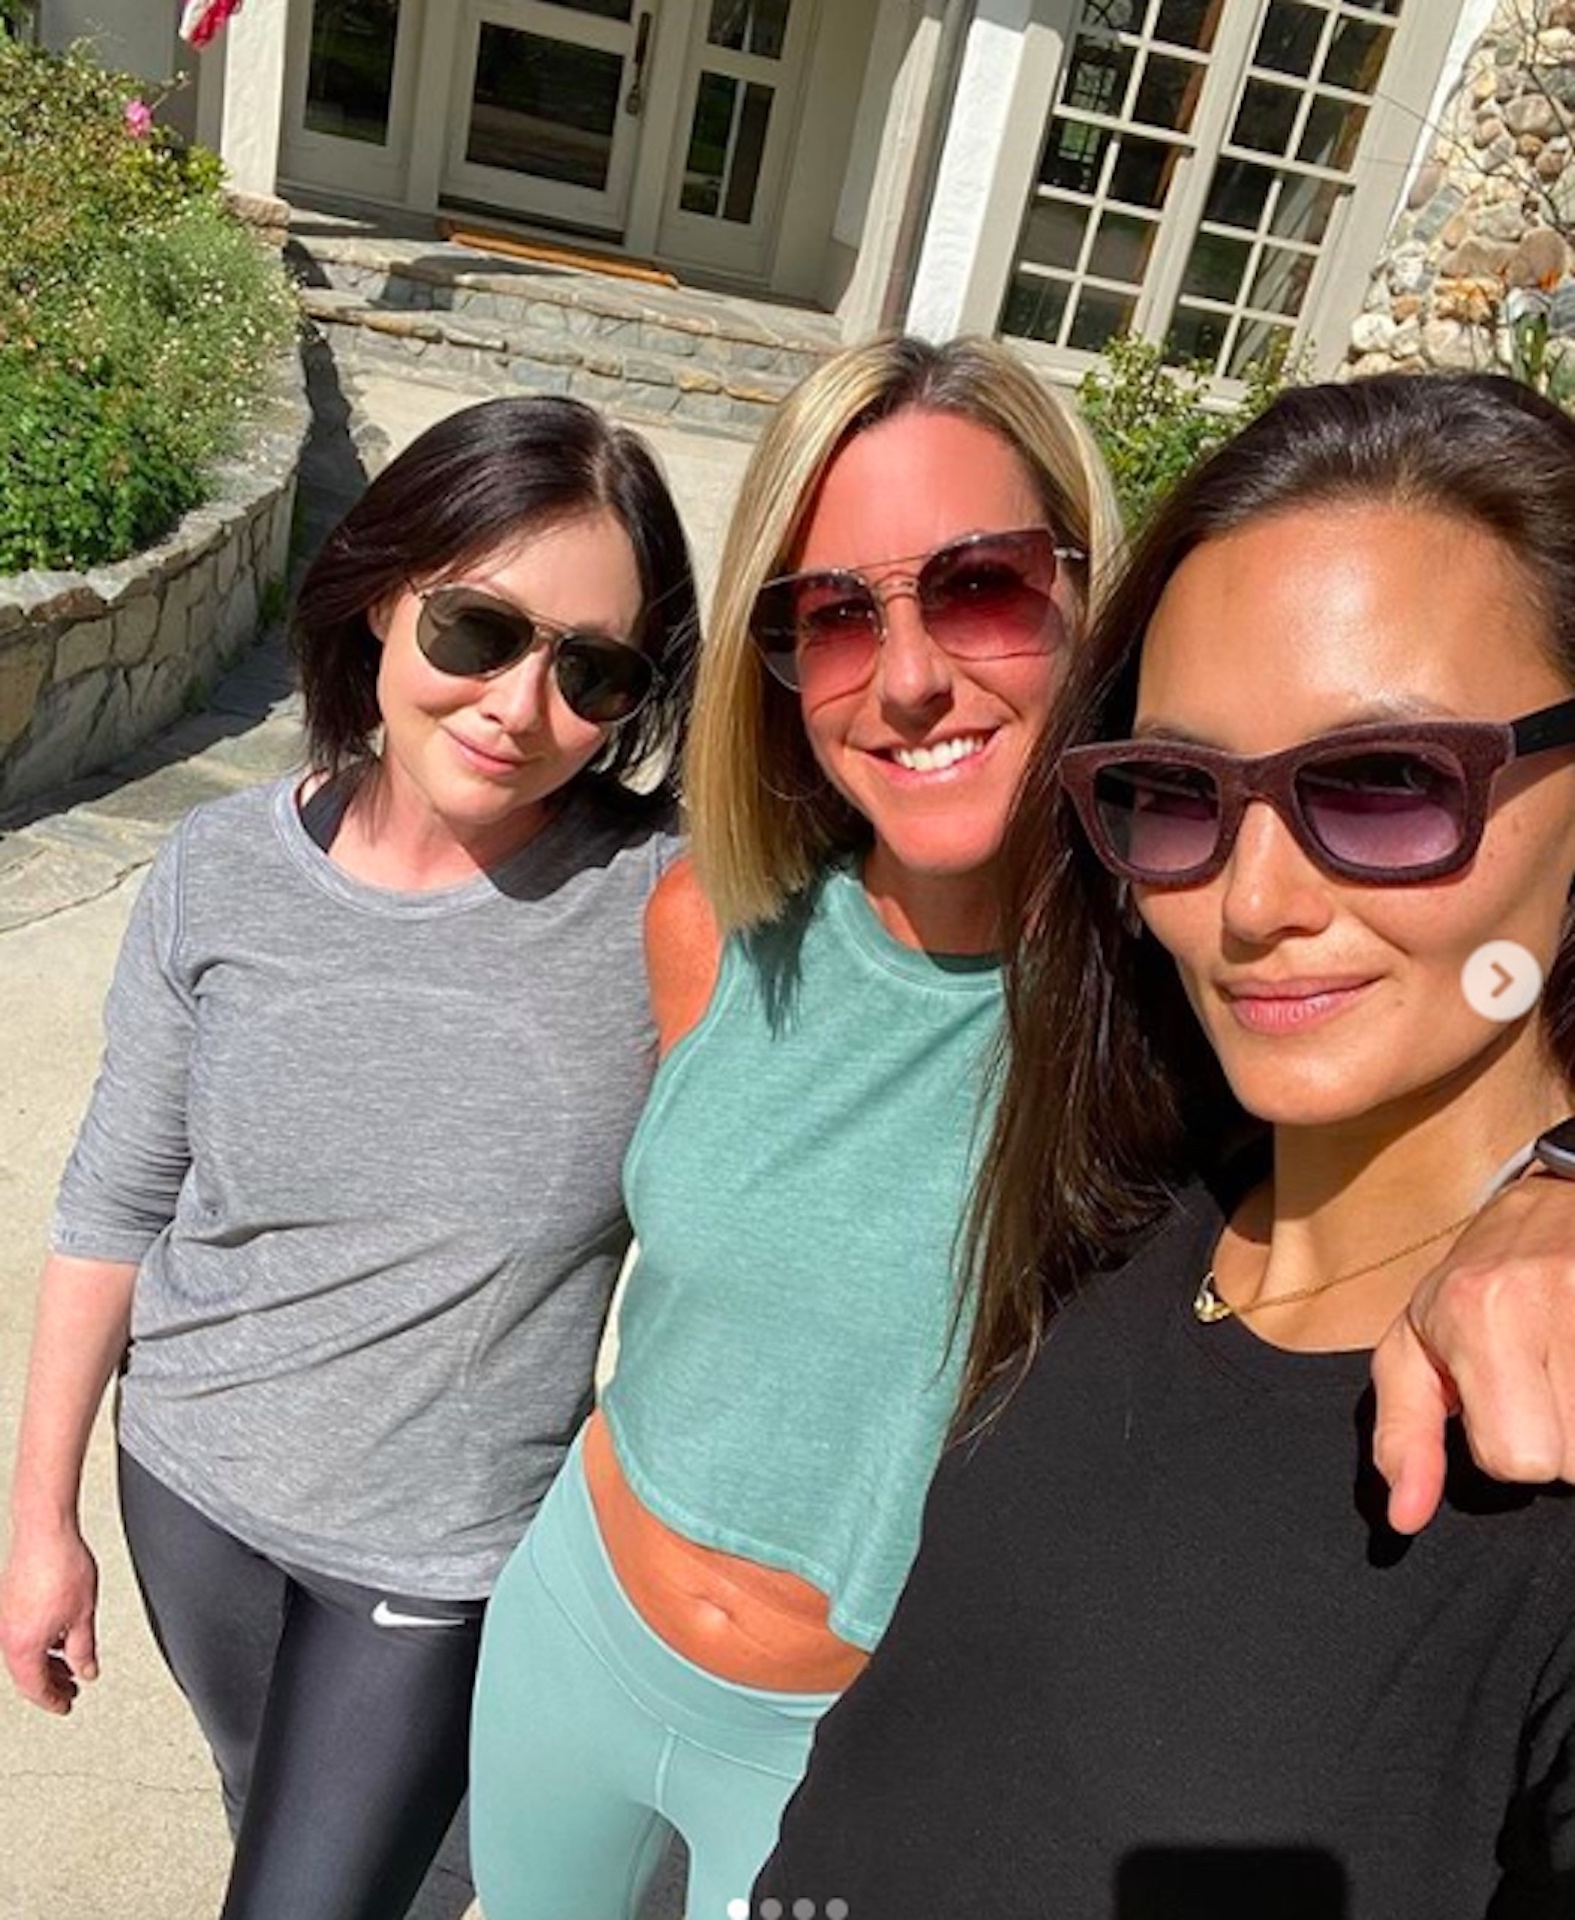 Shannen Doherty posing in a photo with two of her friends